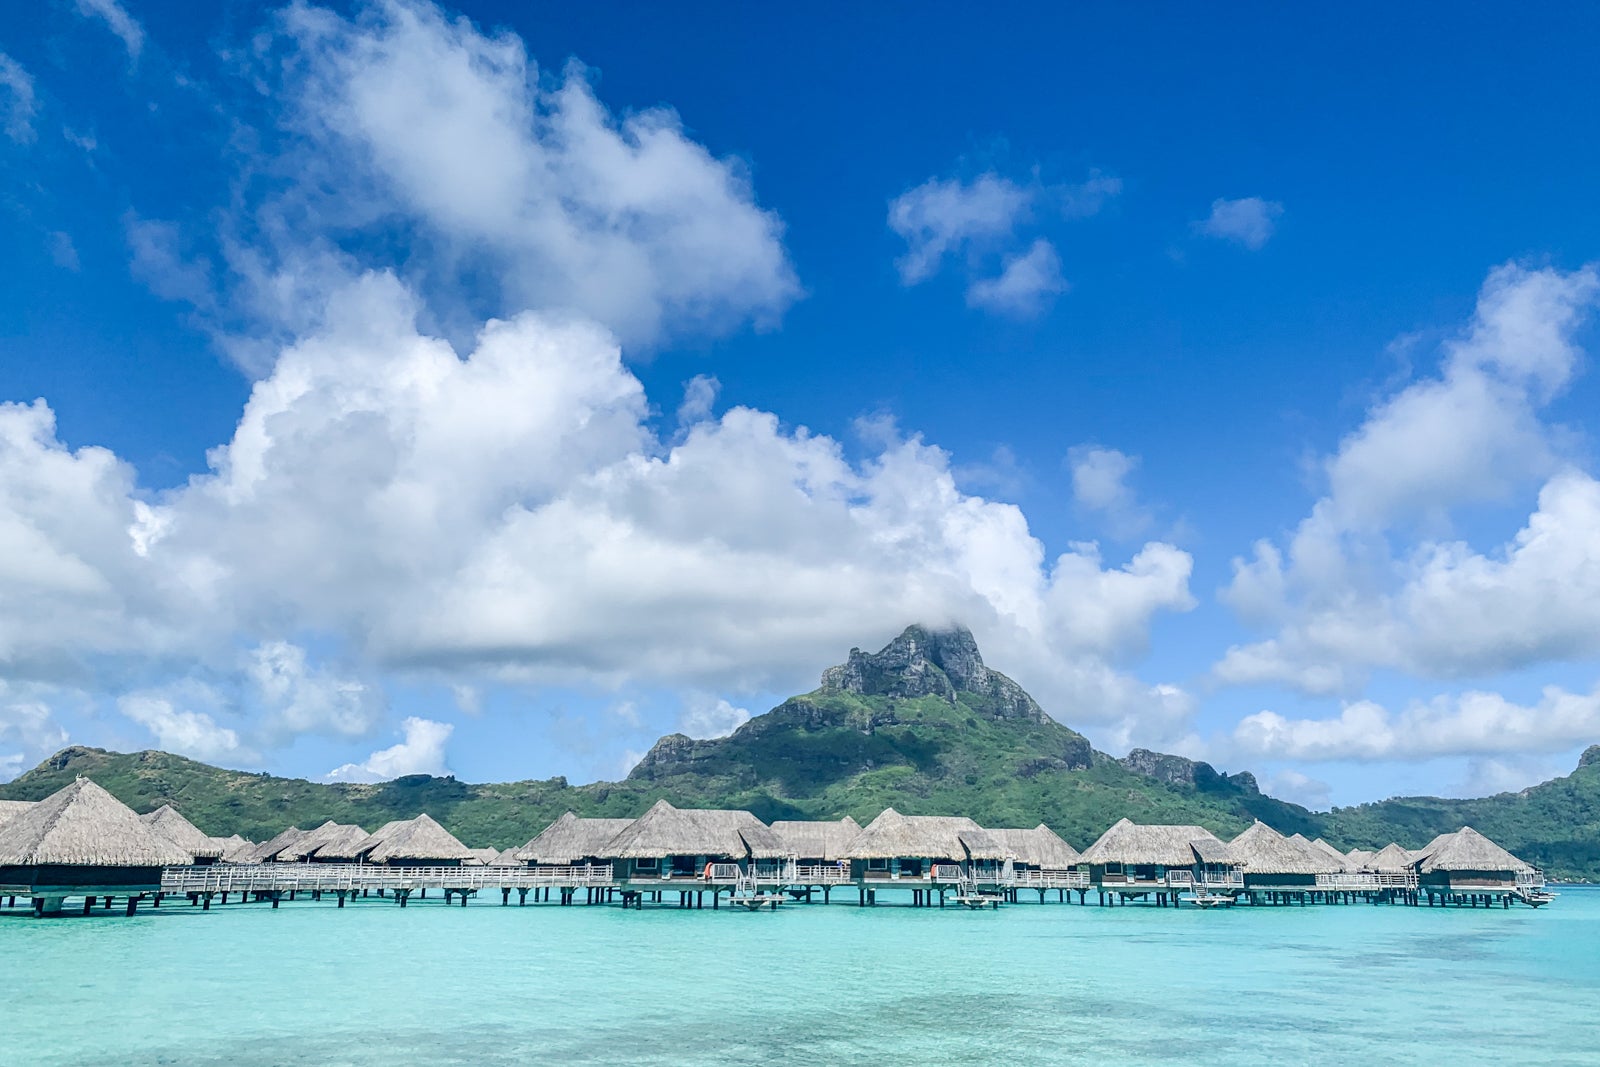 My top things to do in French Polynesia from ATV-ing to whale watching